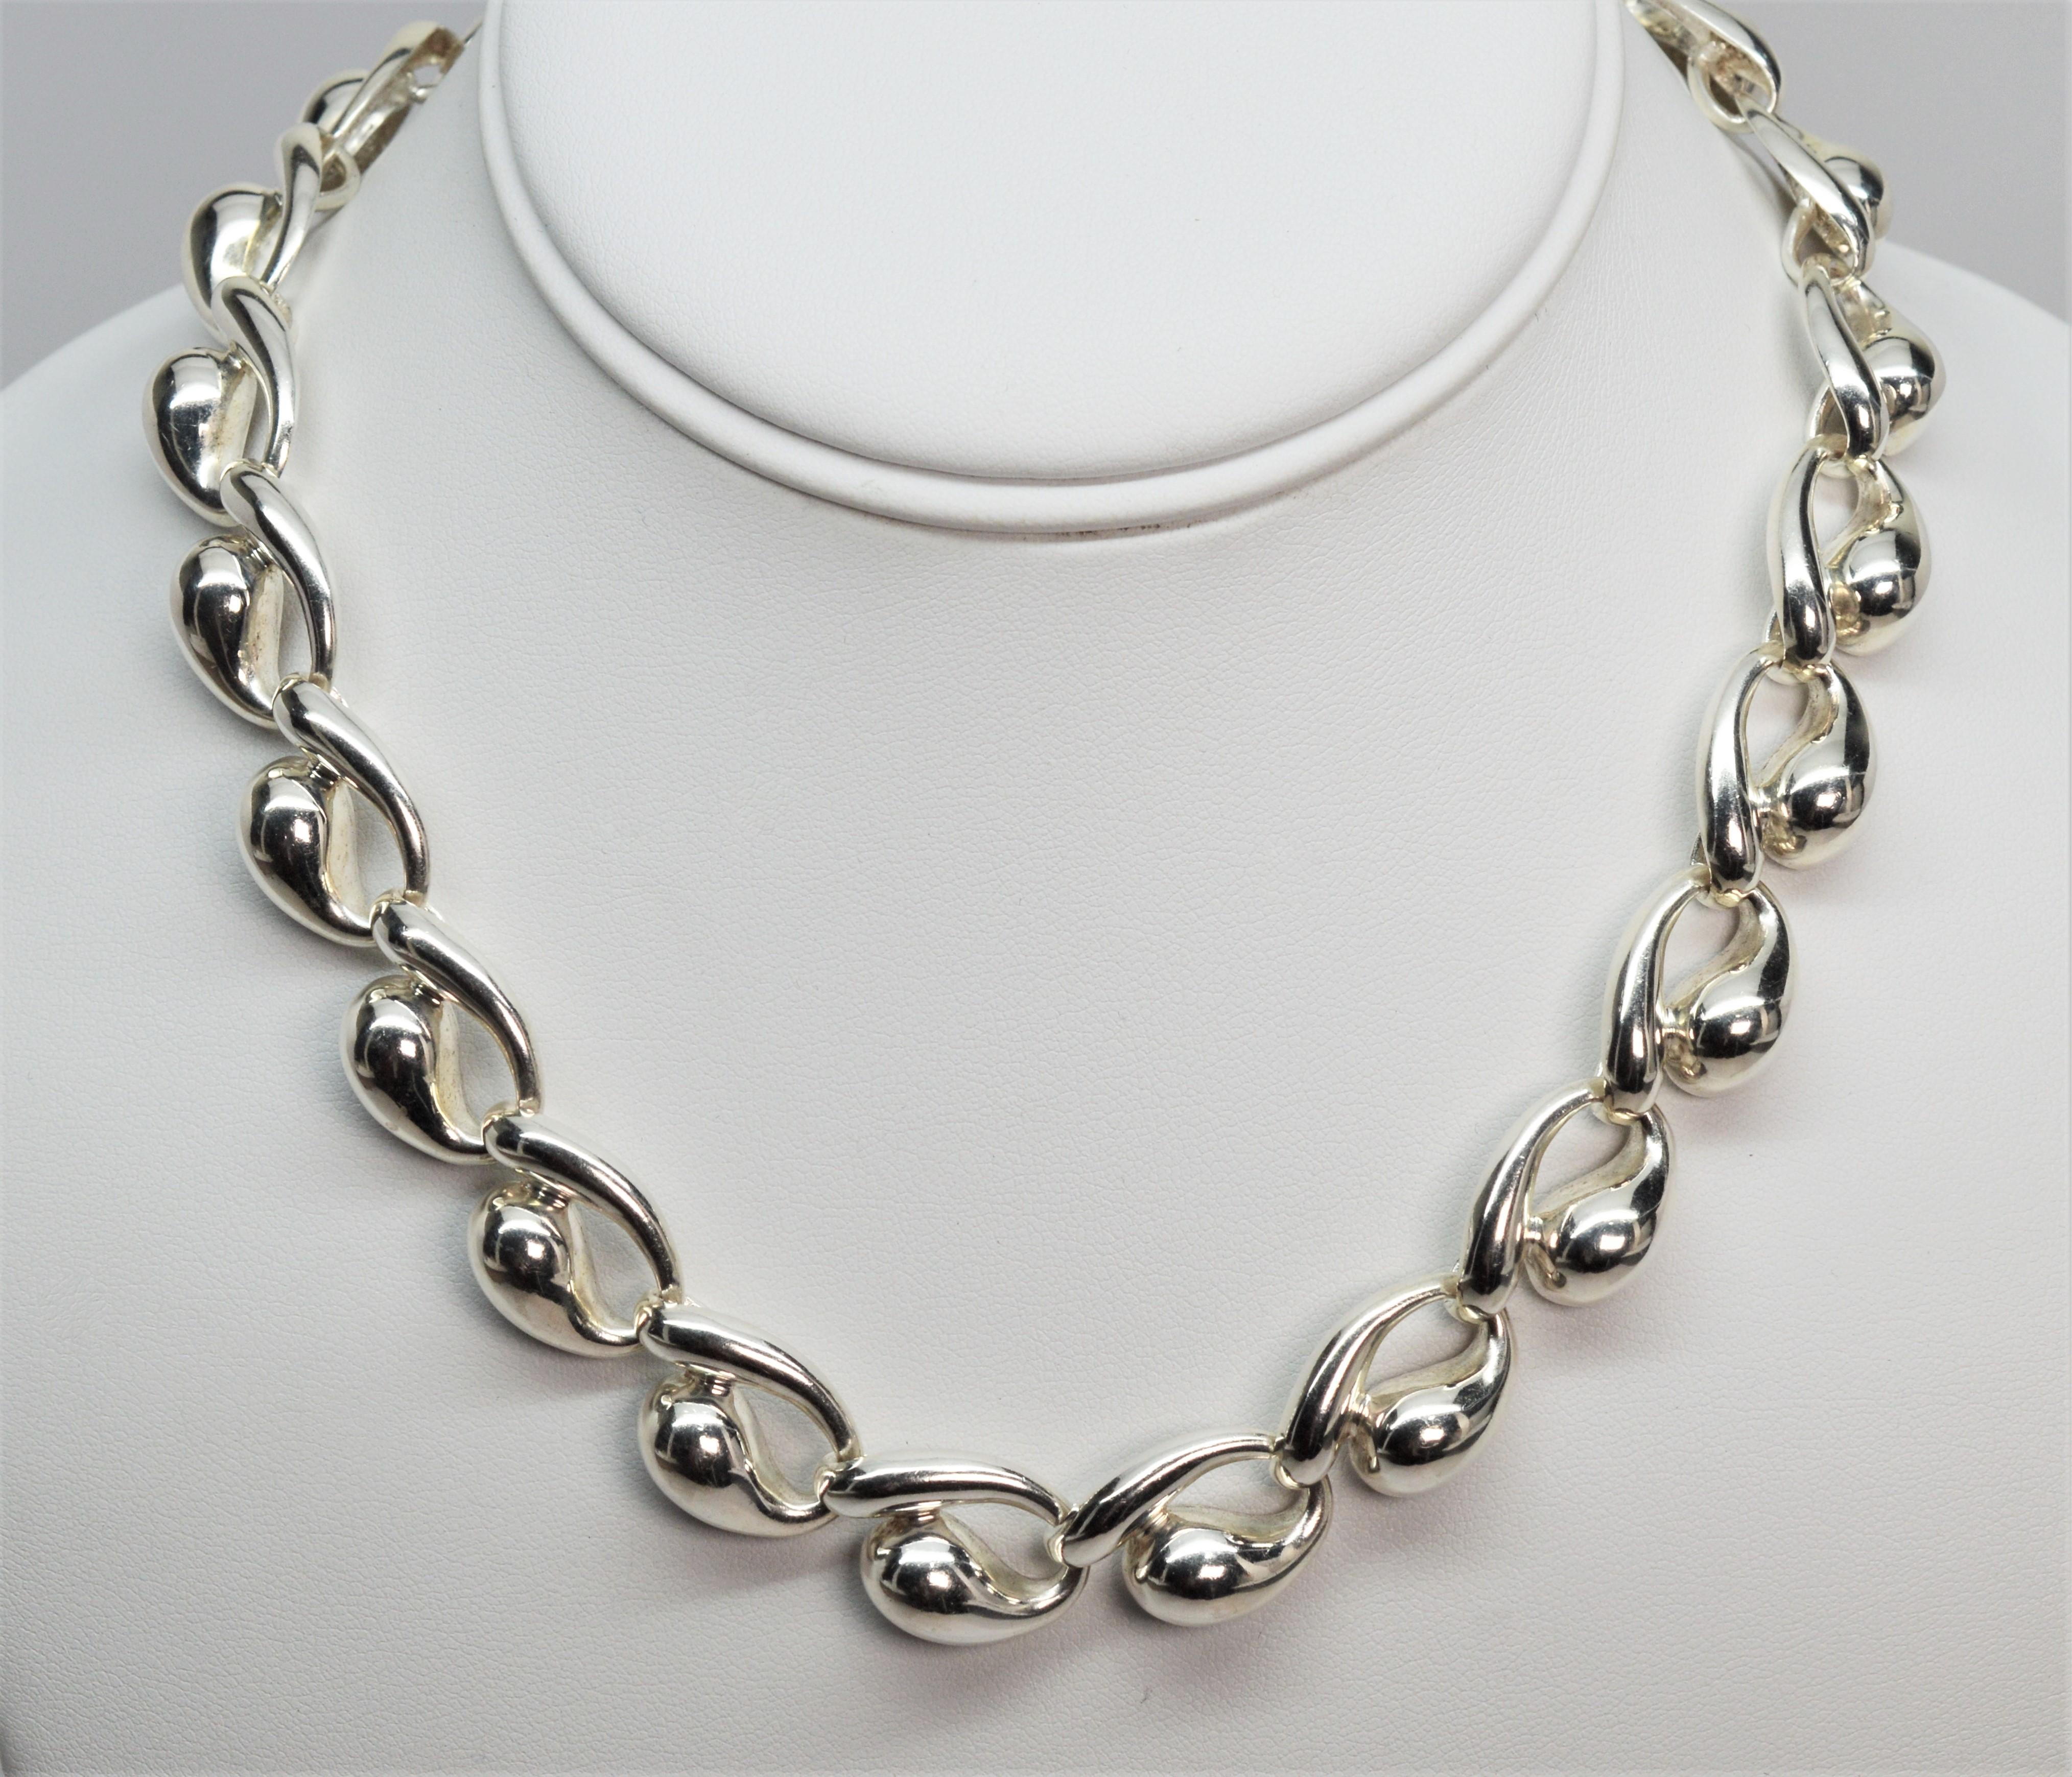 Vintage Charles Krypell signed sculptured sterling silver link seventeen inch statement necklace. Unique and stylish with tear drop inspired links in high luster sterling silver. 
Measures approximately 1/2 inch wide and 3/8 inch deep. Has easy